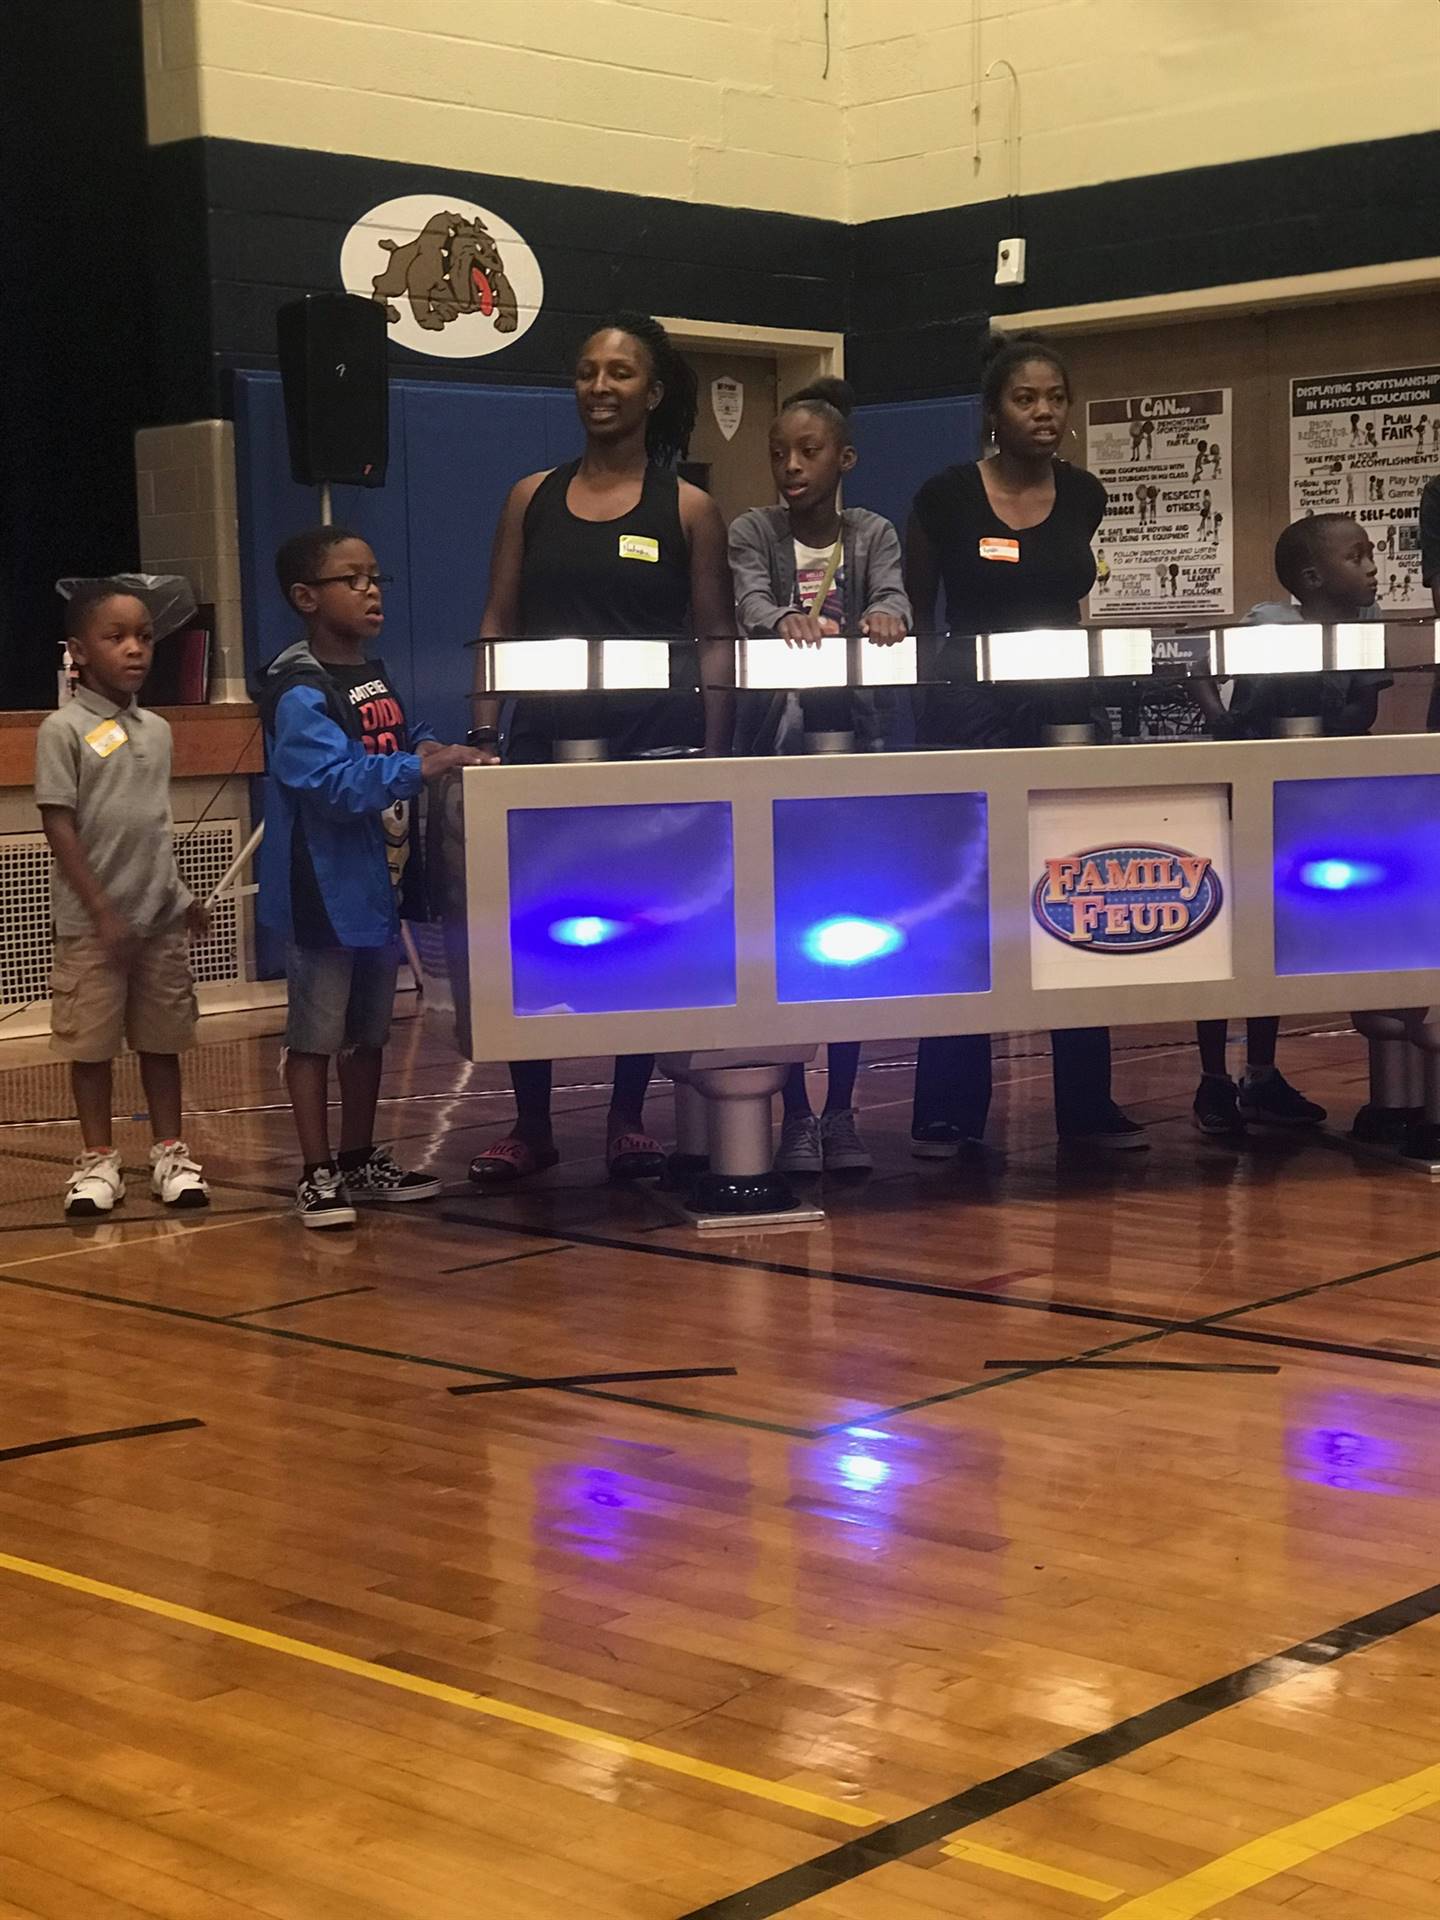 William Foster Family Feud Night